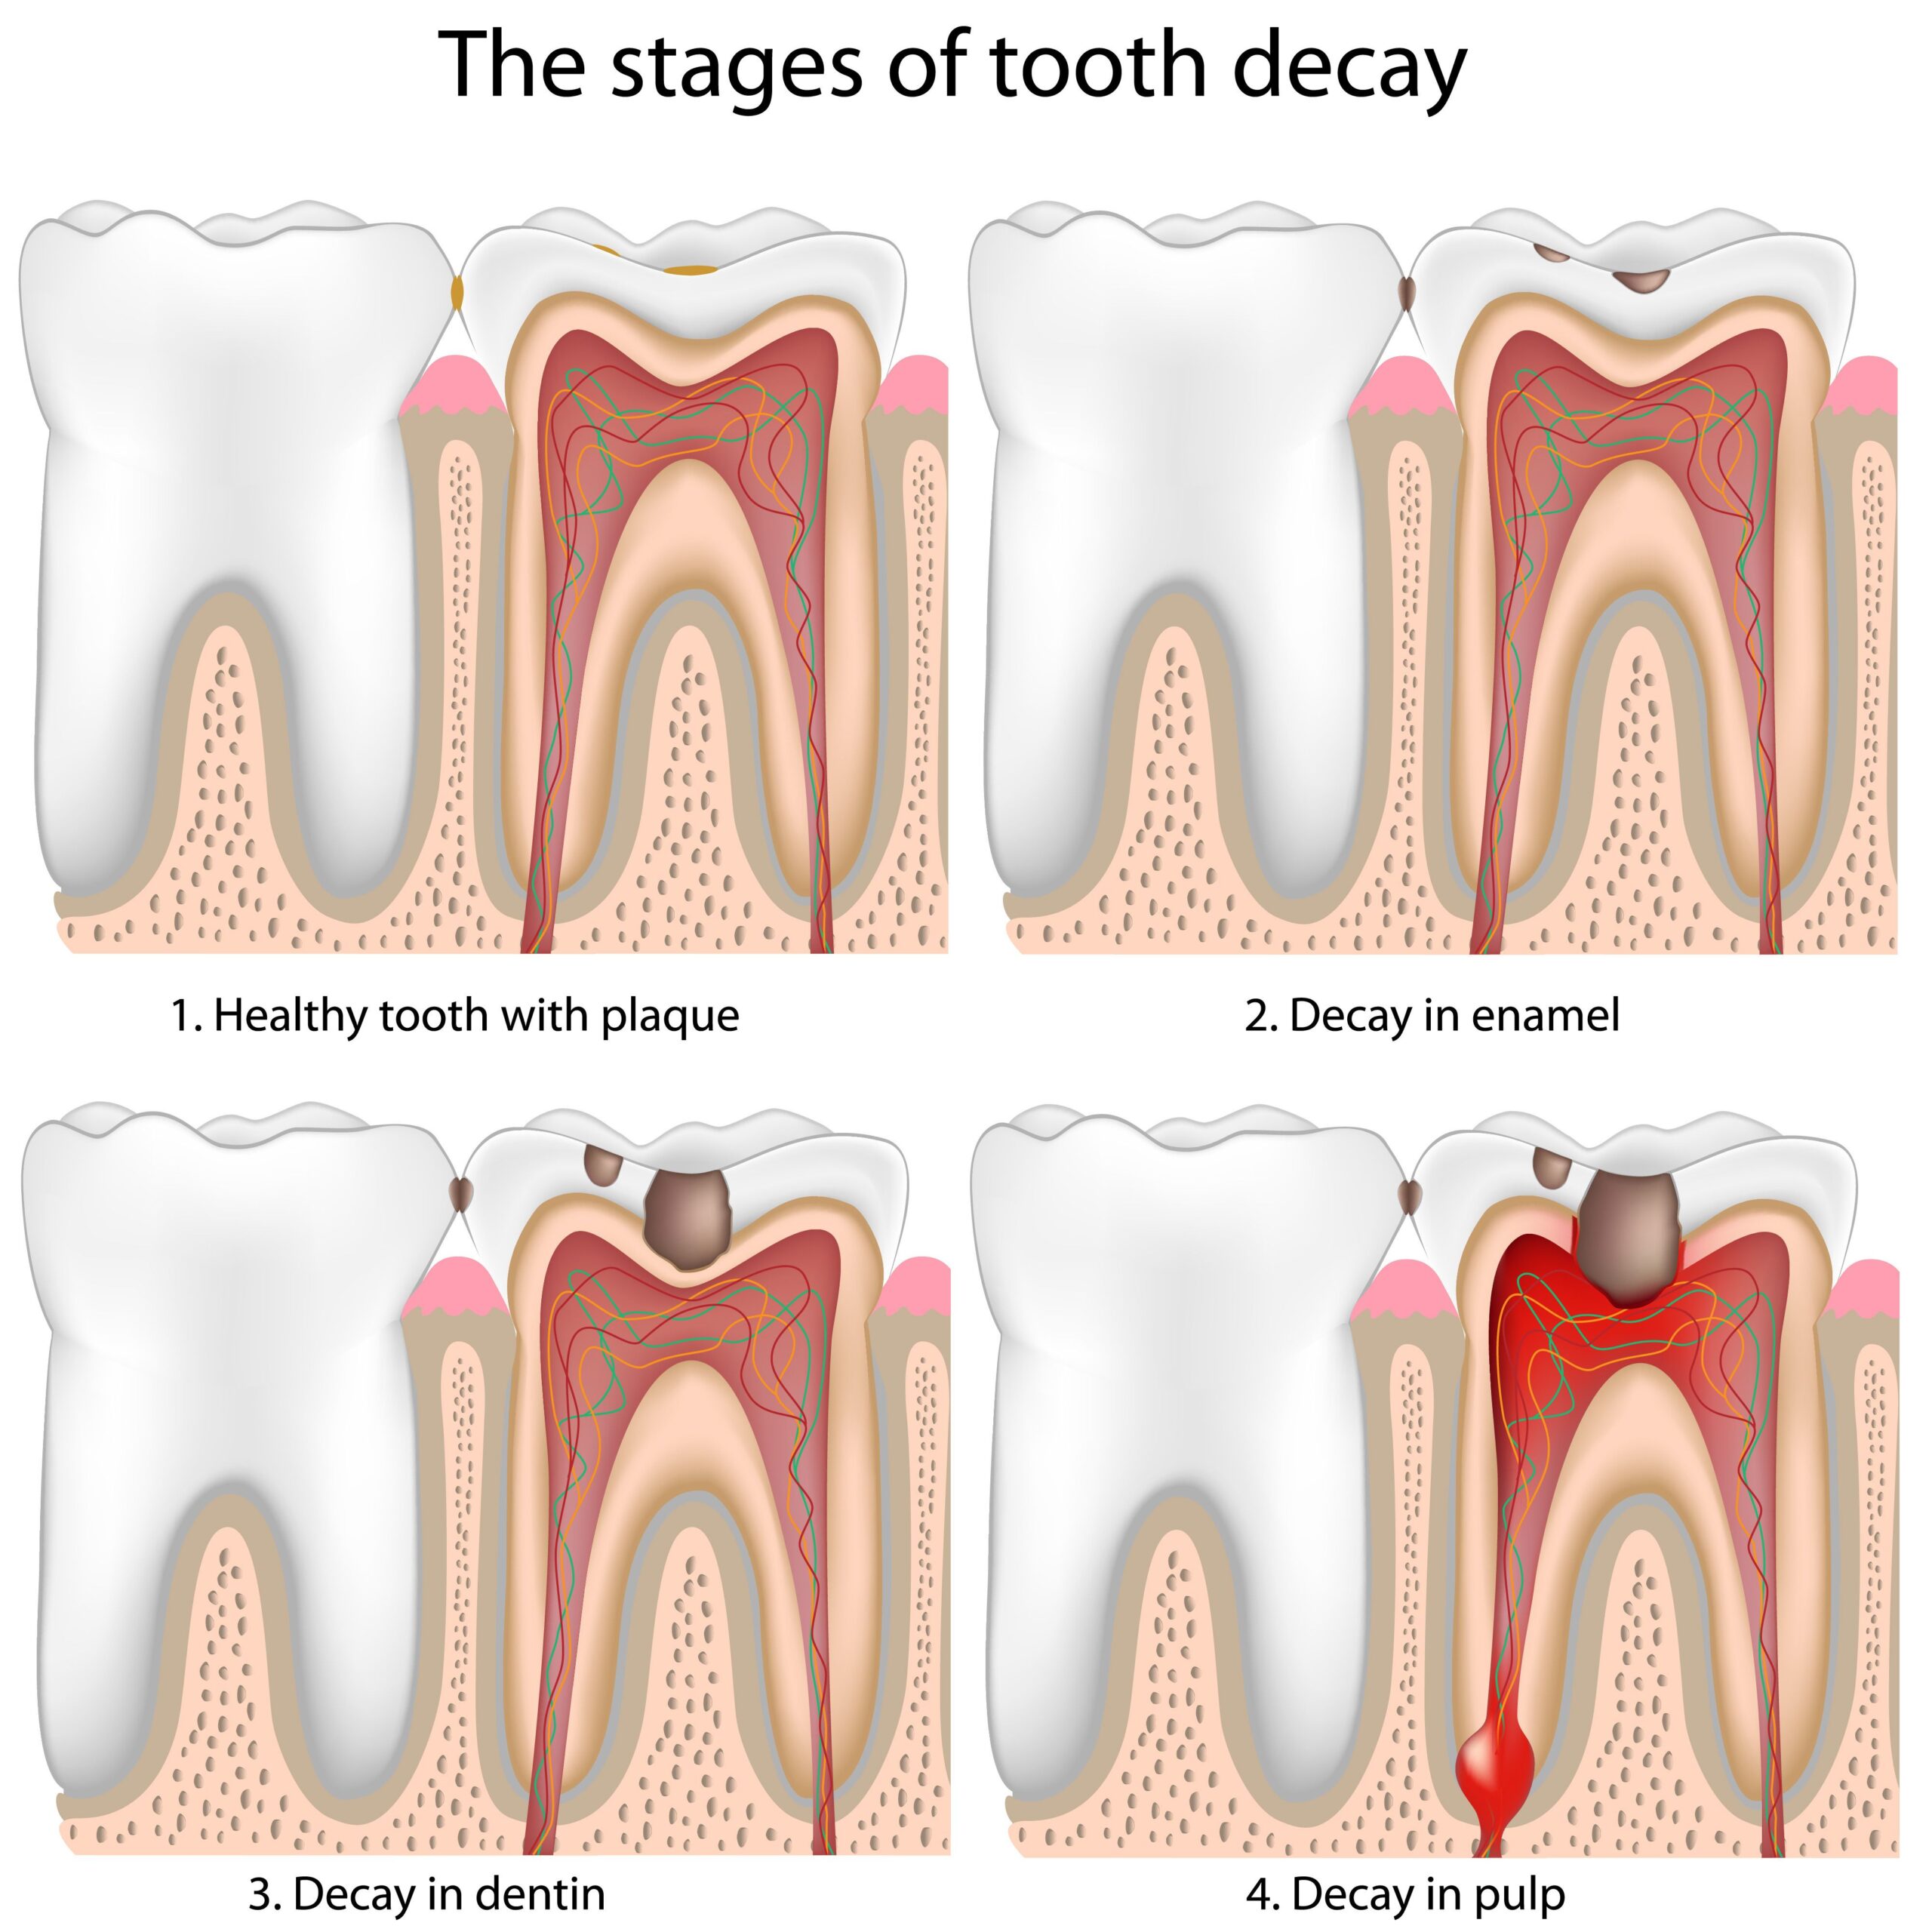 The stage of tooth decay